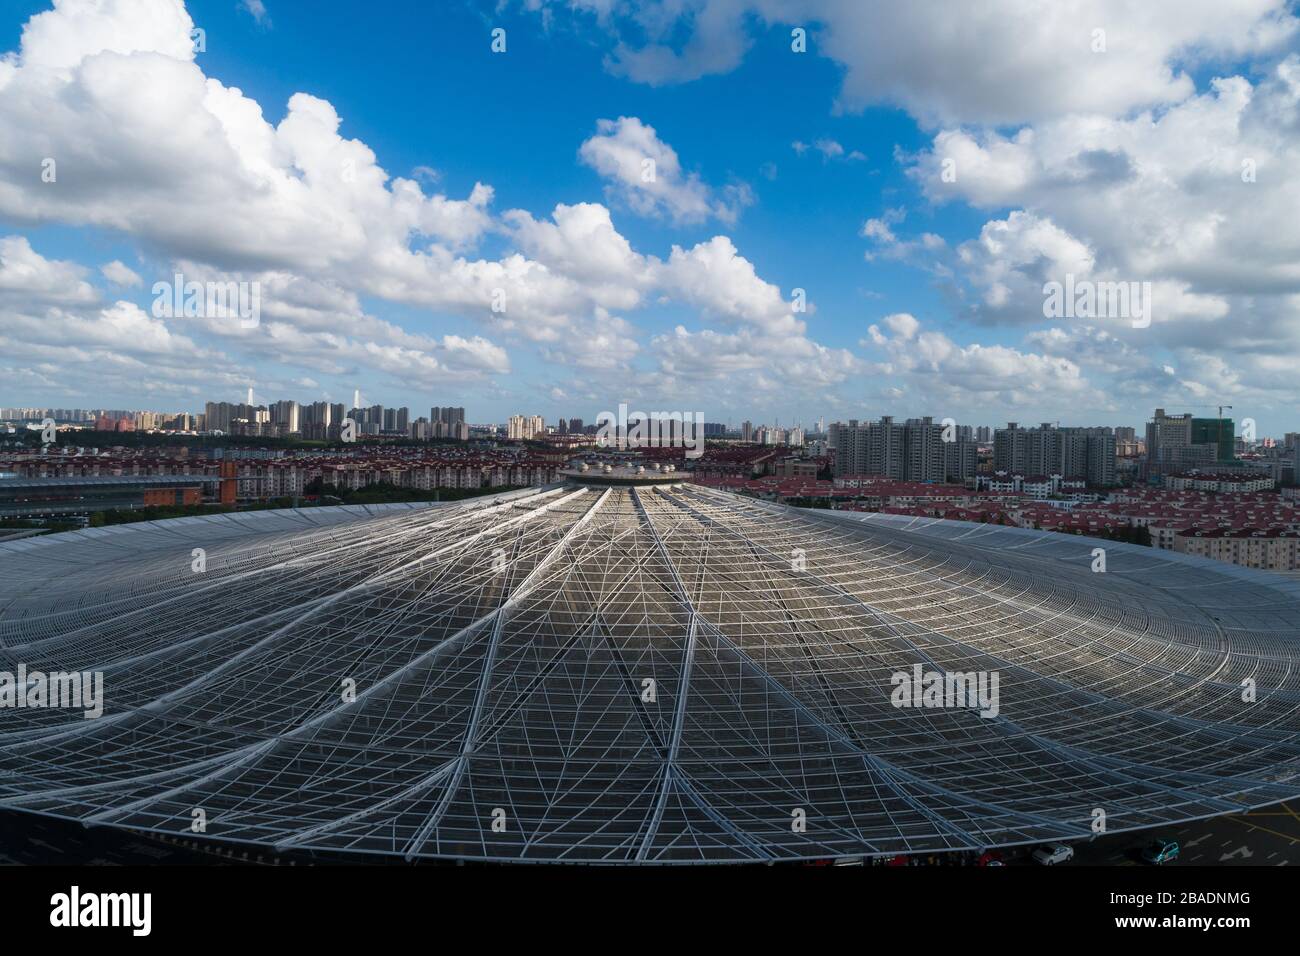 Roofing of railway station steel frame structure Stock Photo